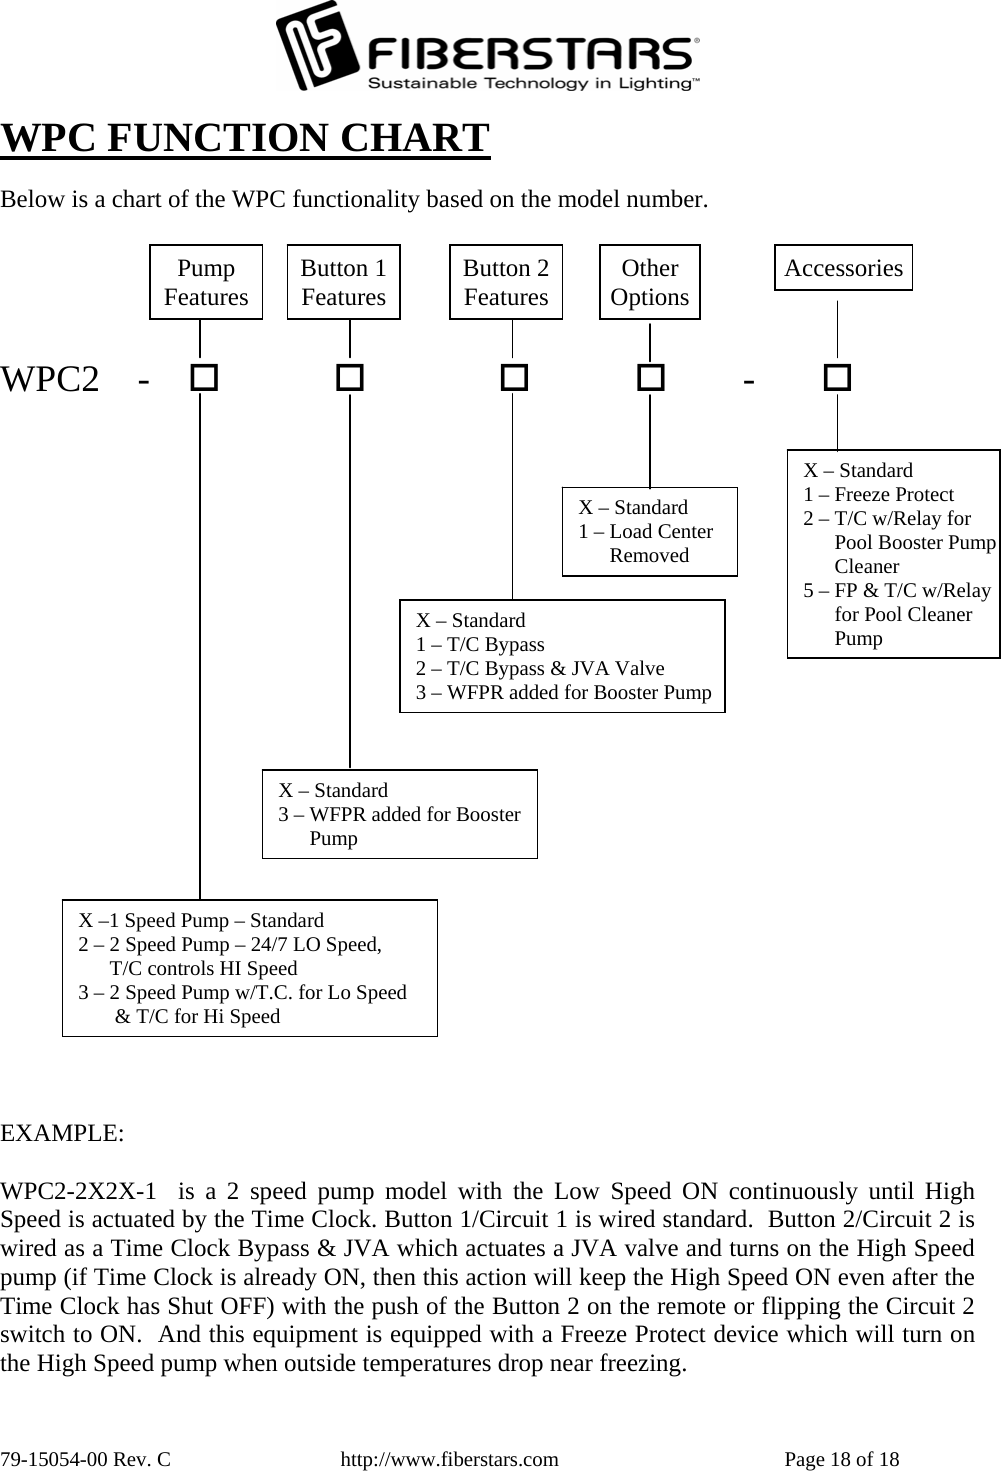  WPC FUNCTION CHART Below is a chart of the WPC functionality based on the model number.    WPC2    -                                                 -        Pump Features  Button 1 Features  Button 2 Features  Other Options AccessoriesX – Standard 1 – Load Center       Removed X – Standard 1 – T/C Bypass 2 – T/C Bypass &amp; JVA Valve 3 – WFPR added for Booster Pump X – Standard 3 – WFPR added for Booster       Pump X –1 Speed Pump – Standard 2 – 2 Speed Pump – 24/7 LO Speed,       T/C controls HI Speed 3 – 2 Speed Pump w/T.C. for Lo Speed        &amp; T/C for Hi Speed X – Standard 1 – Freeze Protect 2 – T/C w/Relay for       Pool Booster Pump      Cleaner 5 – FP &amp; T/C w/Relay      for Pool Cleaner       Pump                          EXAMPLE:  WPC2-2X2X-1  is a 2 speed pump model with the Low Speed ON continuously until High Speed is actuated by the Time Clock. Button 1/Circuit 1 is wired standard.  Button 2/Circuit 2 is wired as a Time Clock Bypass &amp; JVA which actuates a JVA valve and turns on the High Speed pump (if Time Clock is already ON, then this action will keep the High Speed ON even after the Time Clock has Shut OFF) with the push of the Button 2 on the remote or flipping the Circuit 2 switch to ON.  And this equipment is equipped with a Freeze Protect device which will turn on the High Speed pump when outside temperatures drop near freezing. 79-15054-00 Rev. C  http://www.fiberstars.com  Page 18 of 18 